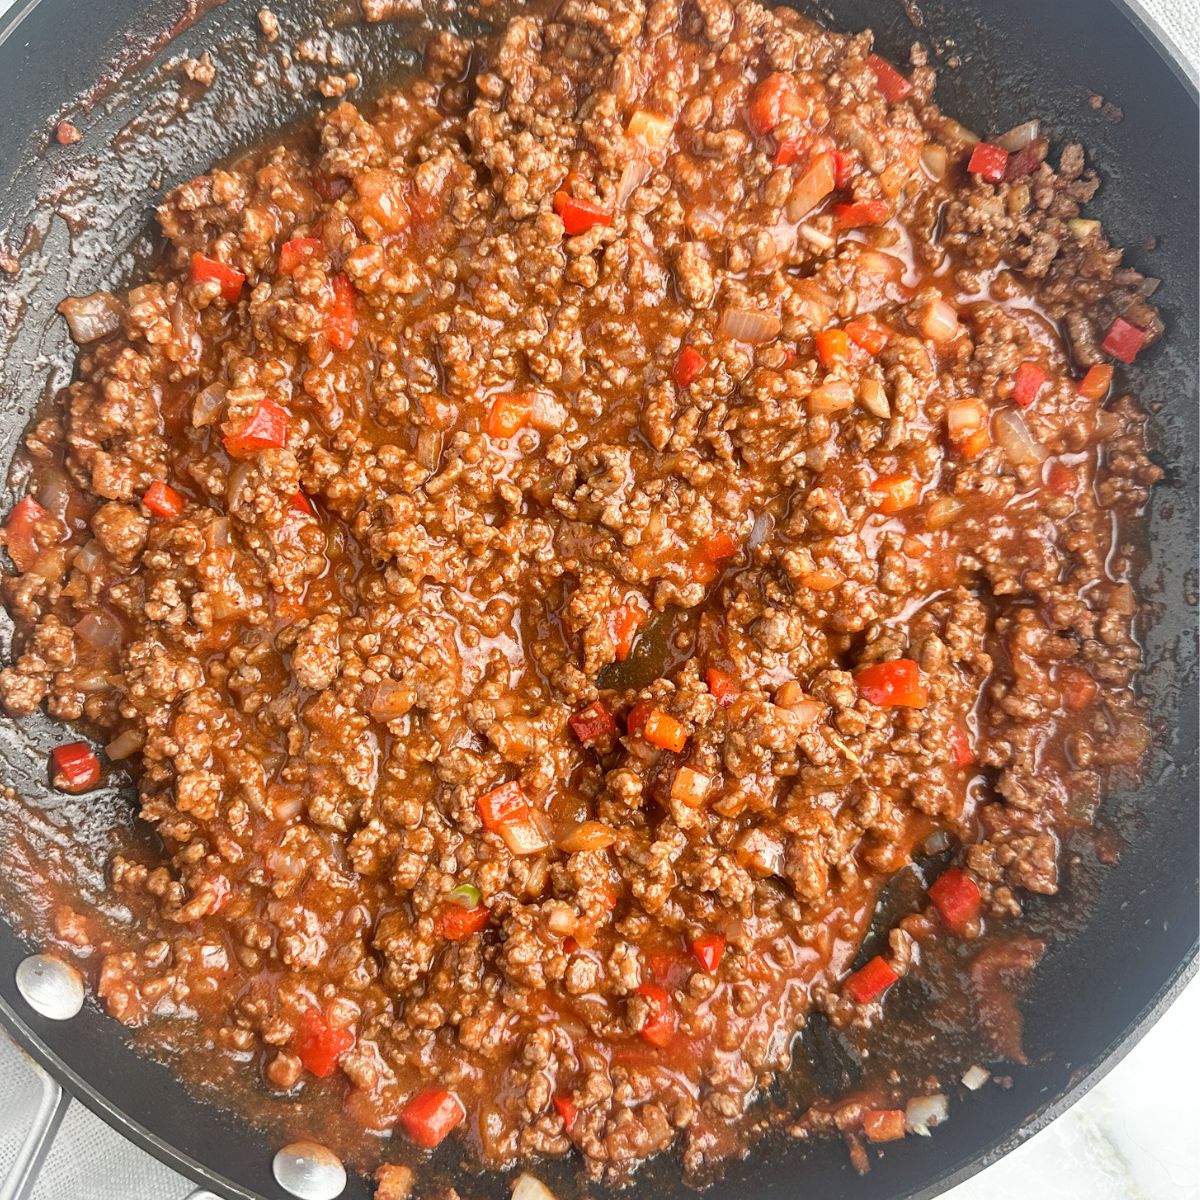 Skillet with cooked ground beef in tomato sauce. 